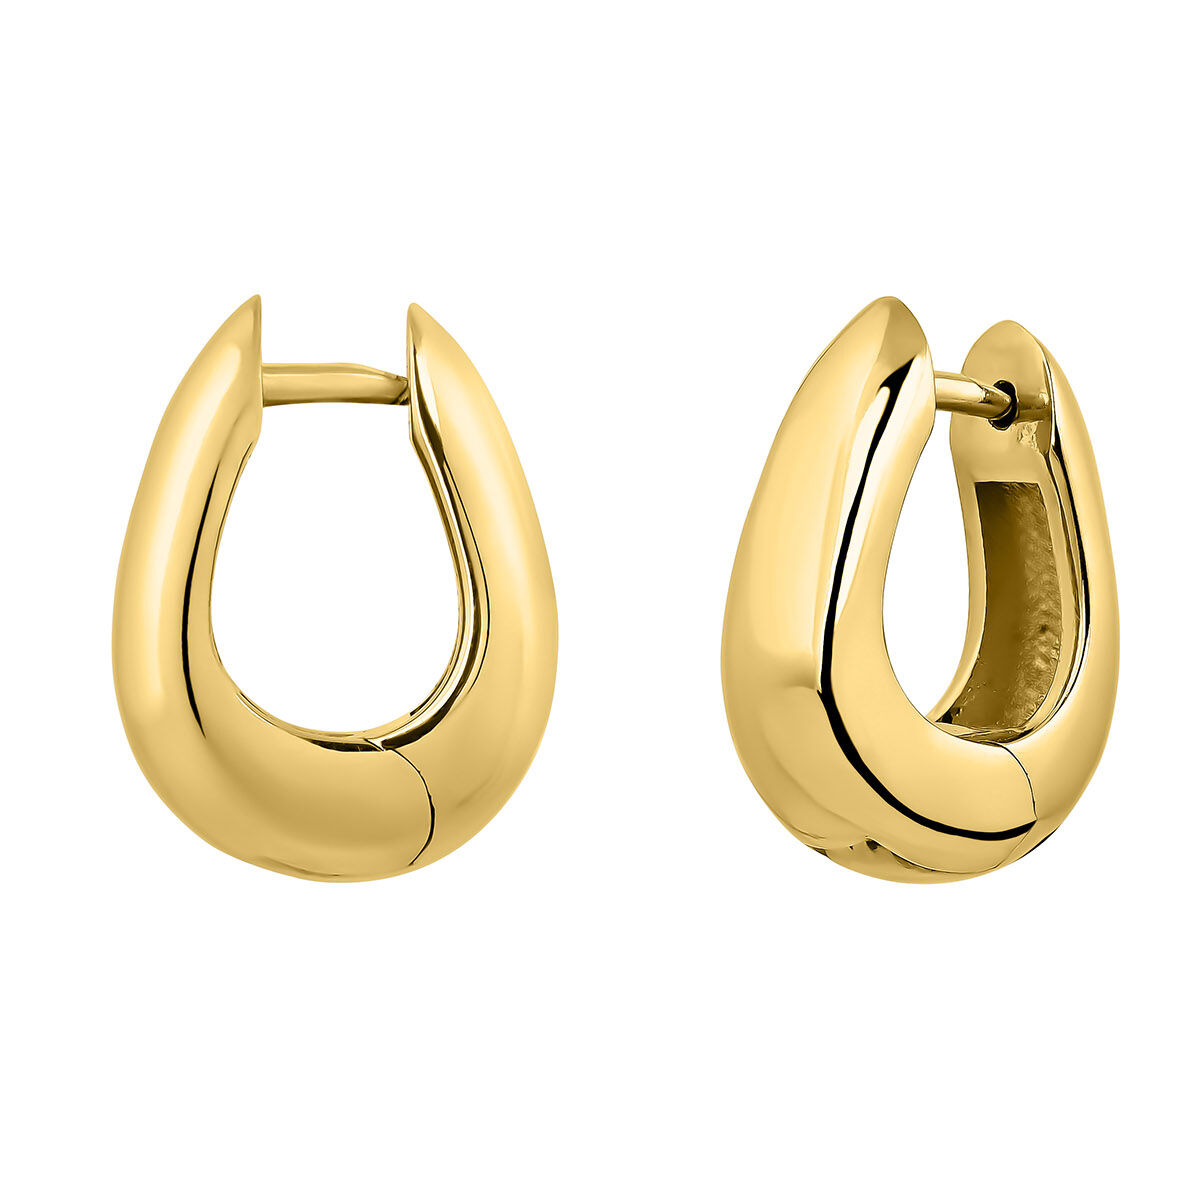 Medium thick oval hoop earrings in 18k yellow gold-plated silver , J05150-02, hi-res